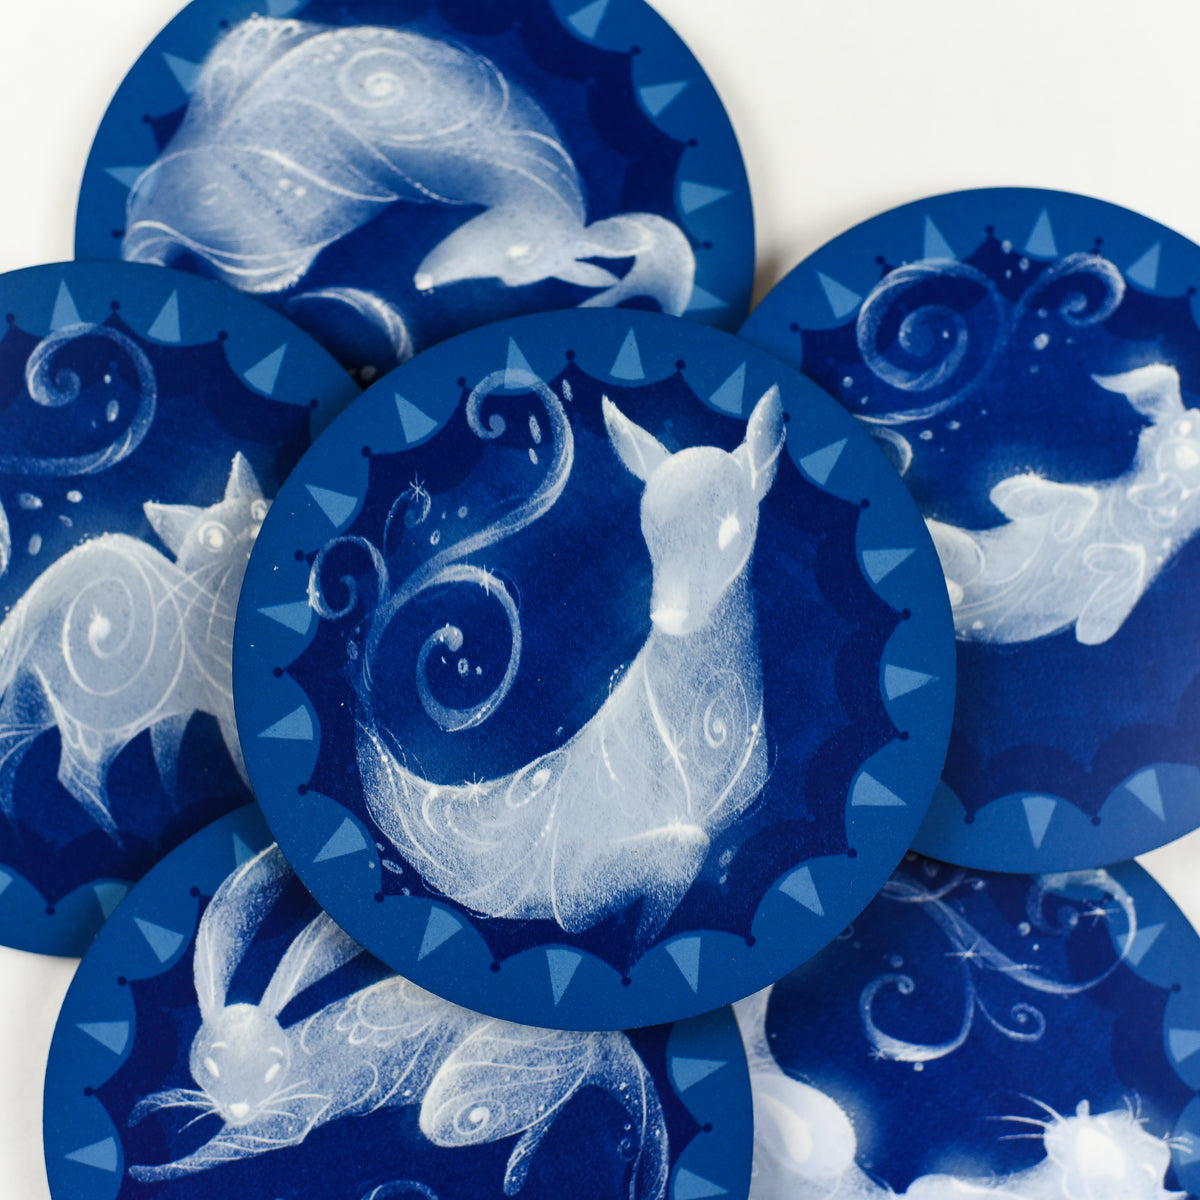 Set of 6 round blue and white Magical Animal Familiar Coasters includes an otter, stag, hare, doe, terrier, and cat.